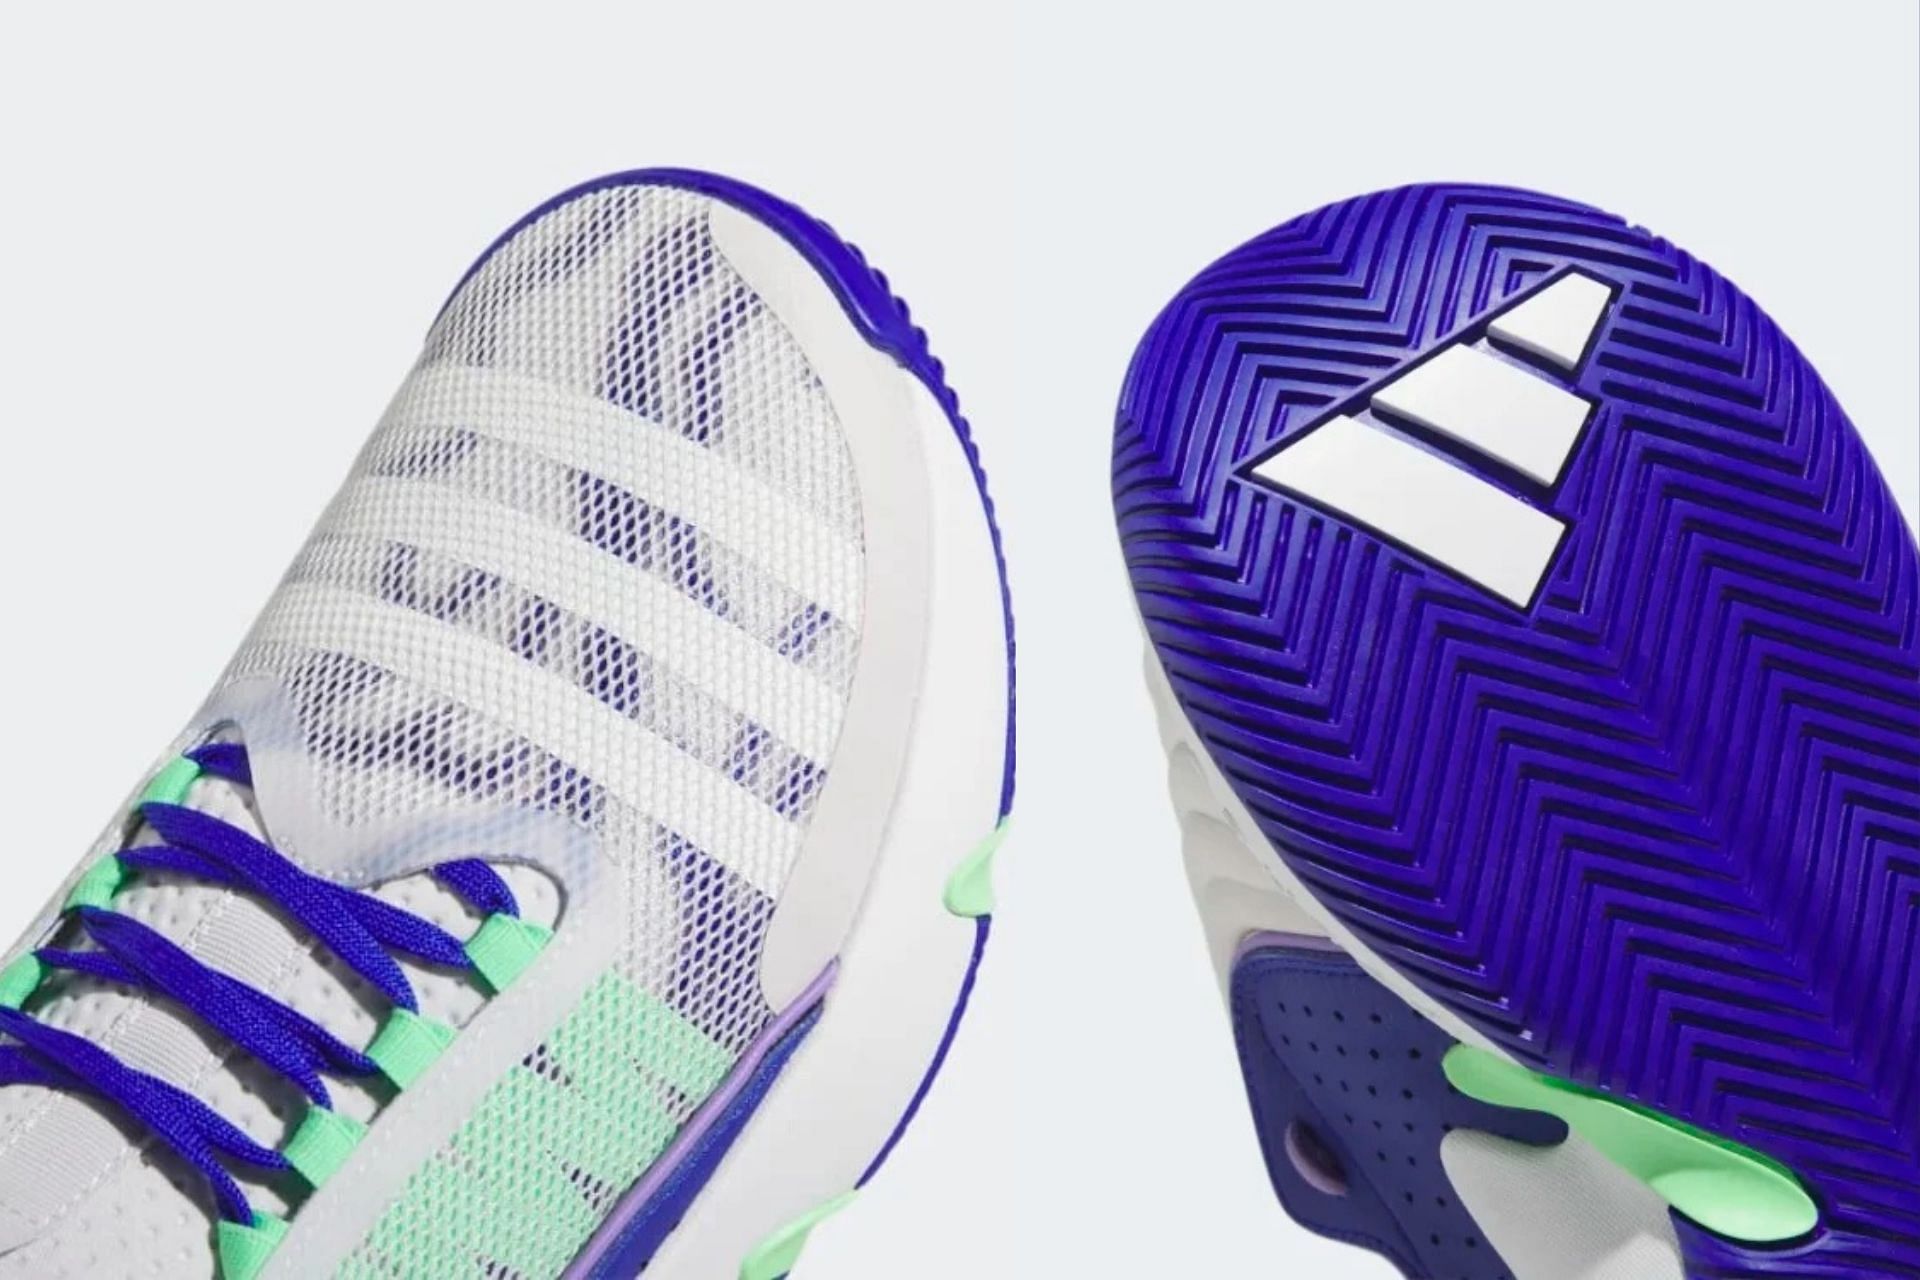 Take a closer look at the toe tops and sole units of the arriving basketball shoe (Image via Adidas)